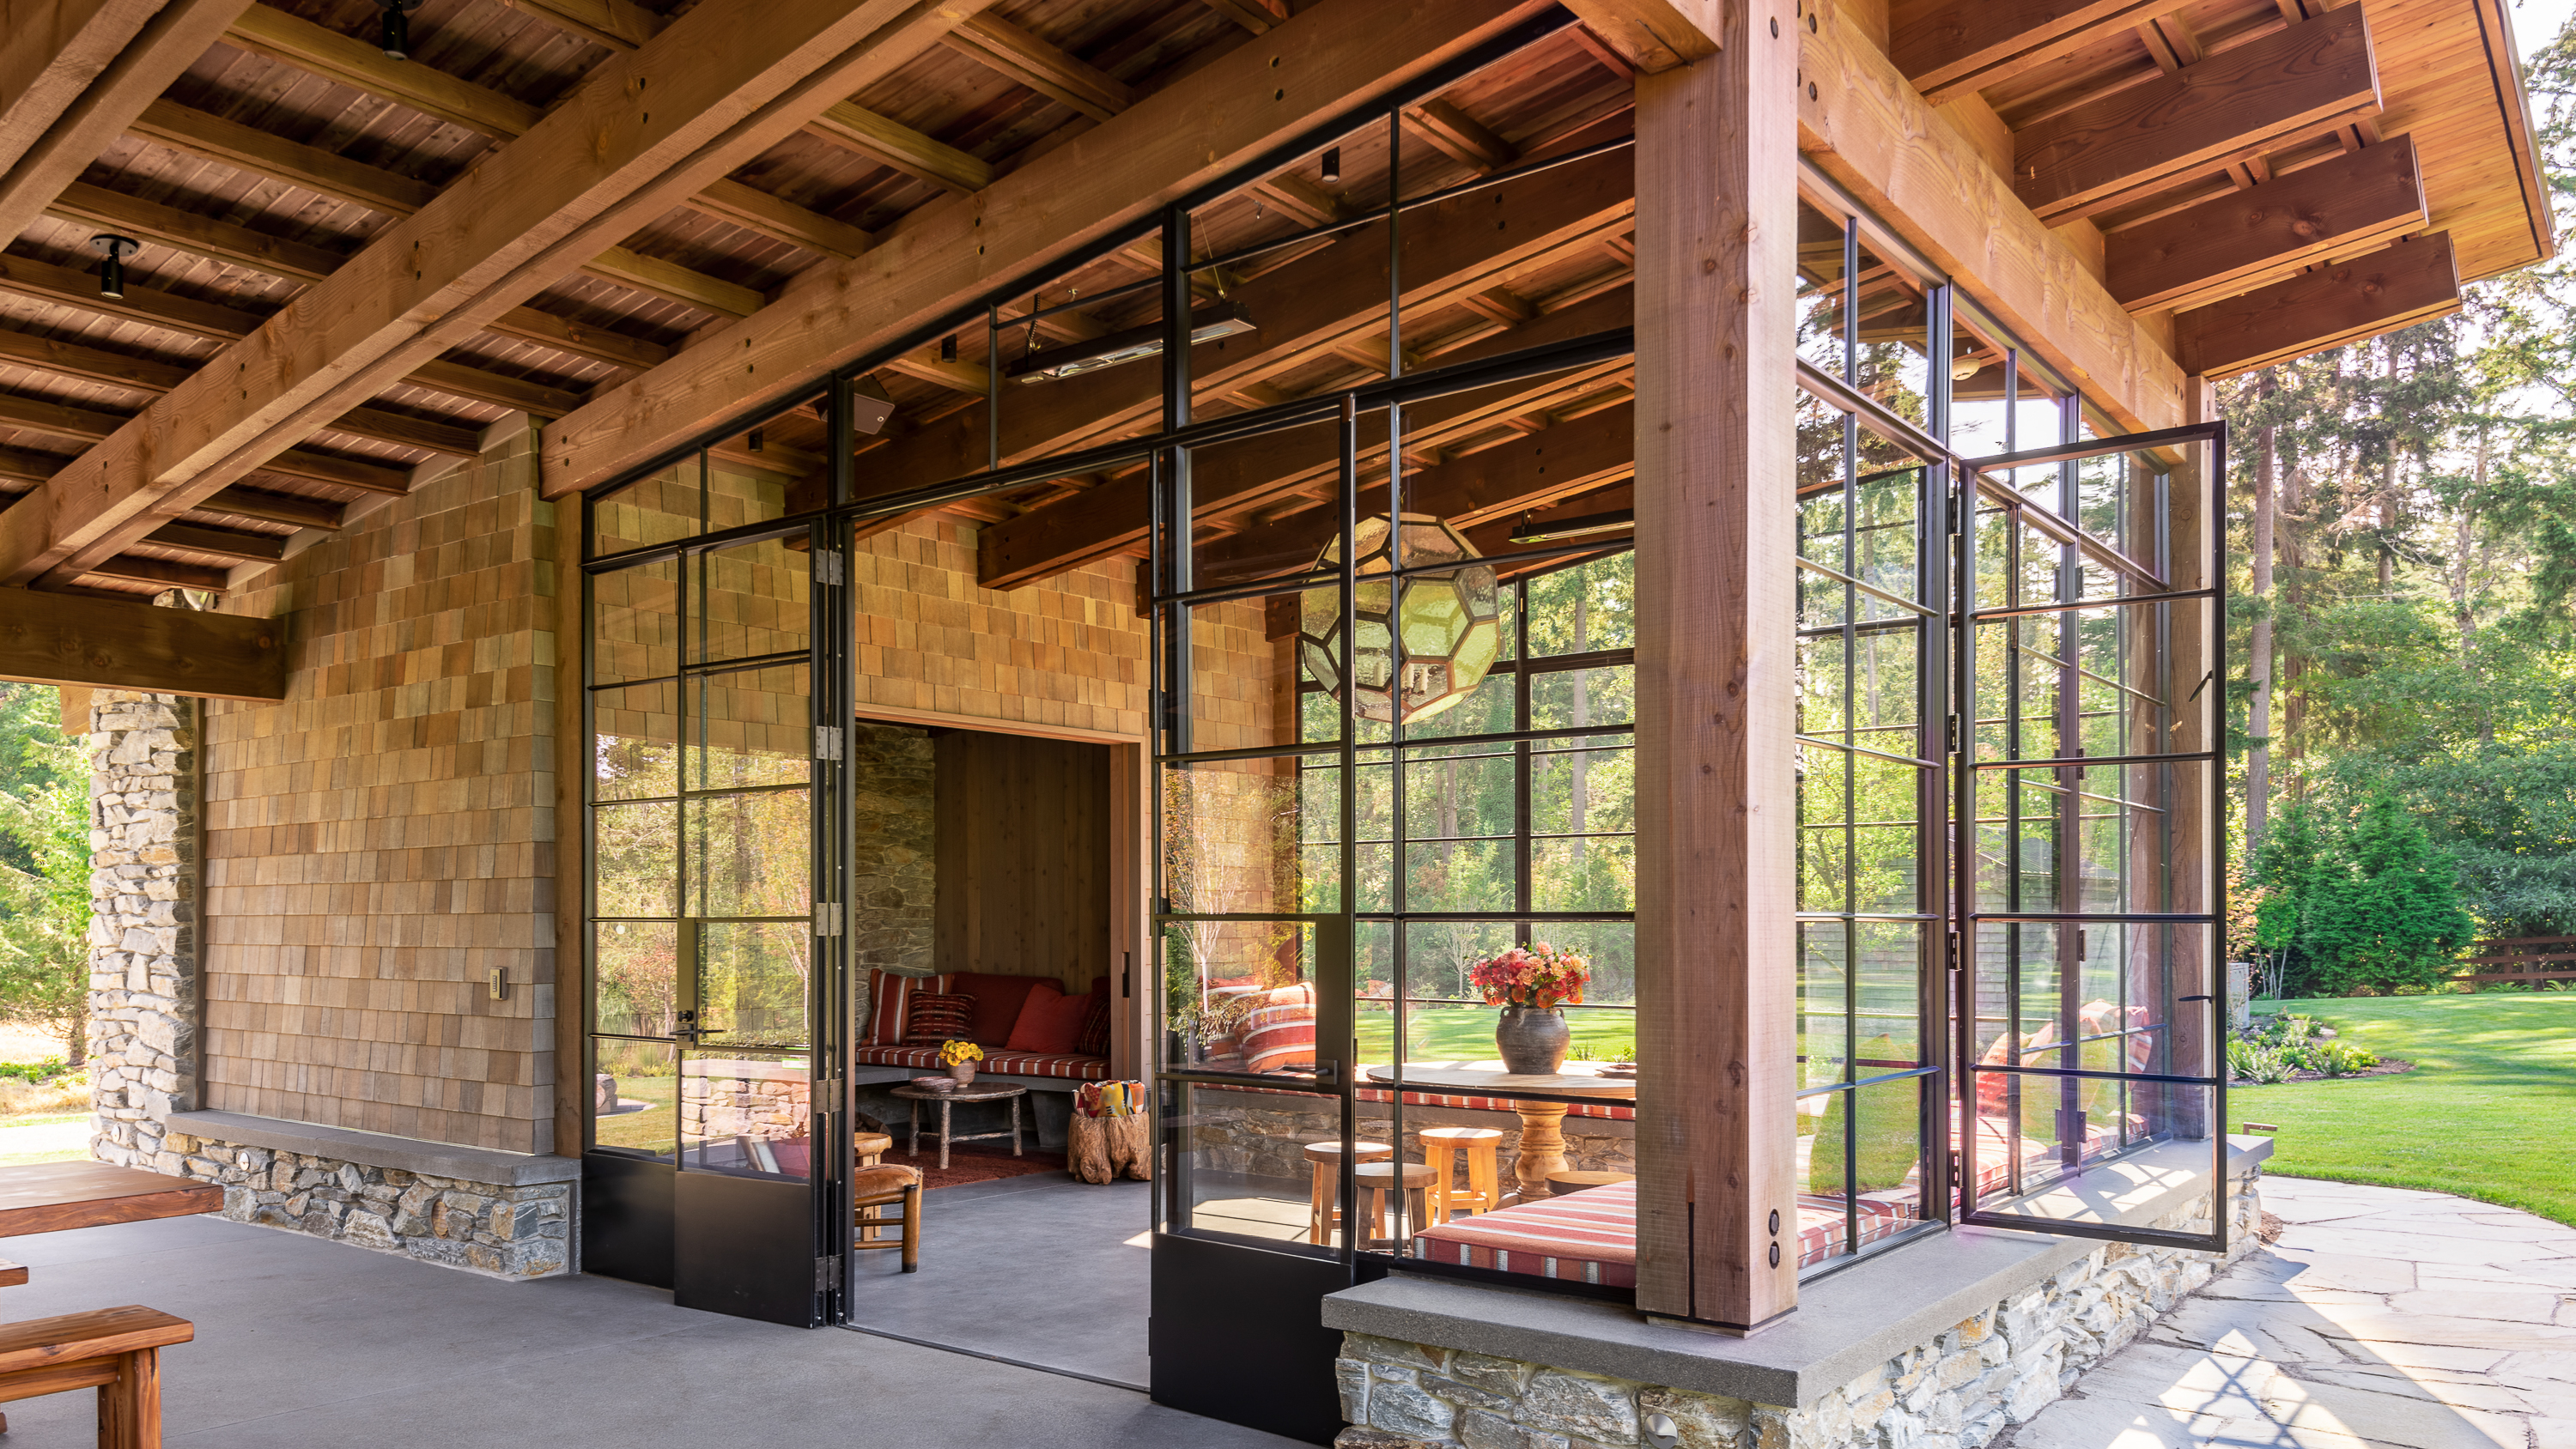 Glass, Timber, and Stone give this indoor/outdoor living space a close connection with nature. Vibrant red textiles bring warmth to the space.